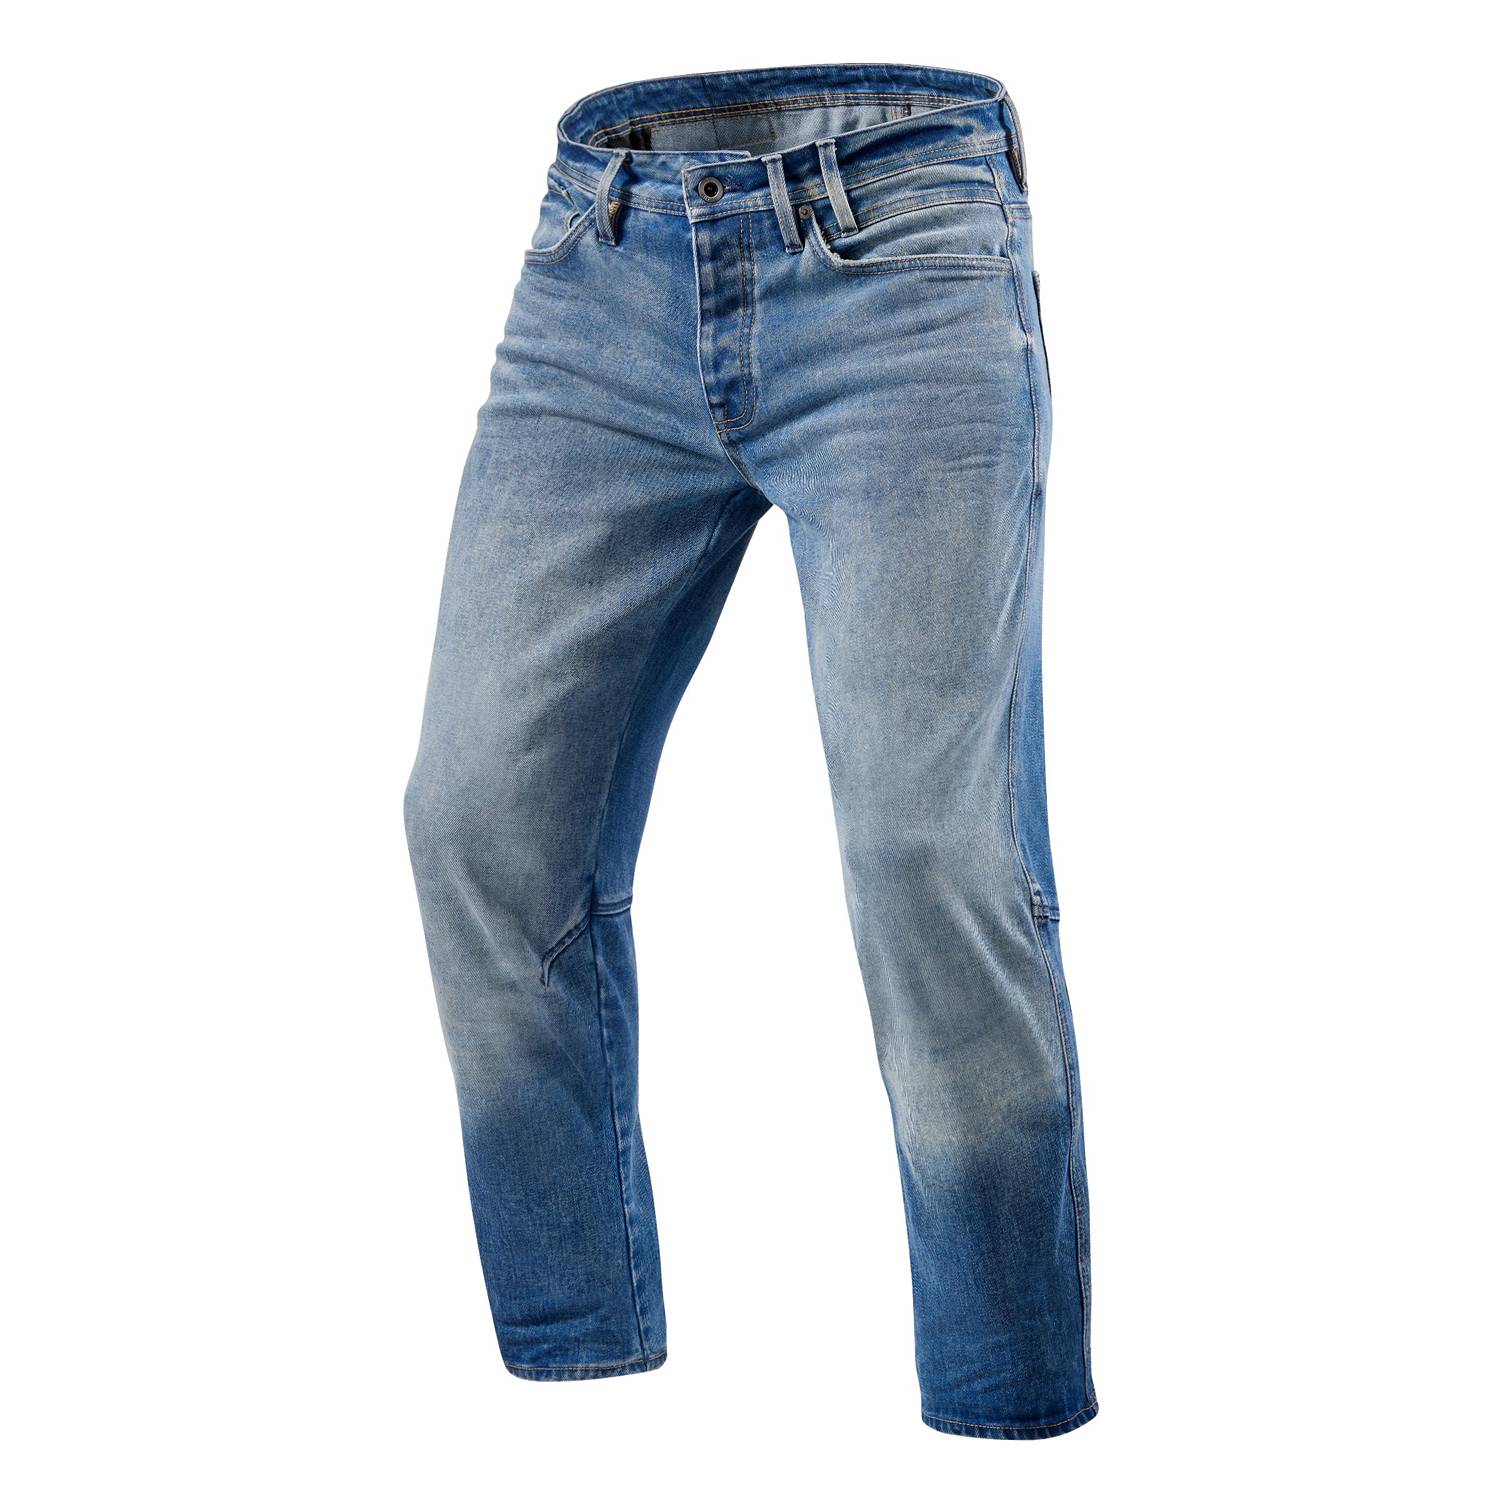 Image of REV'IT! Salt TF Mid Blue Used Motorcycle Jeans Size L34/W38 ID 8700001339100